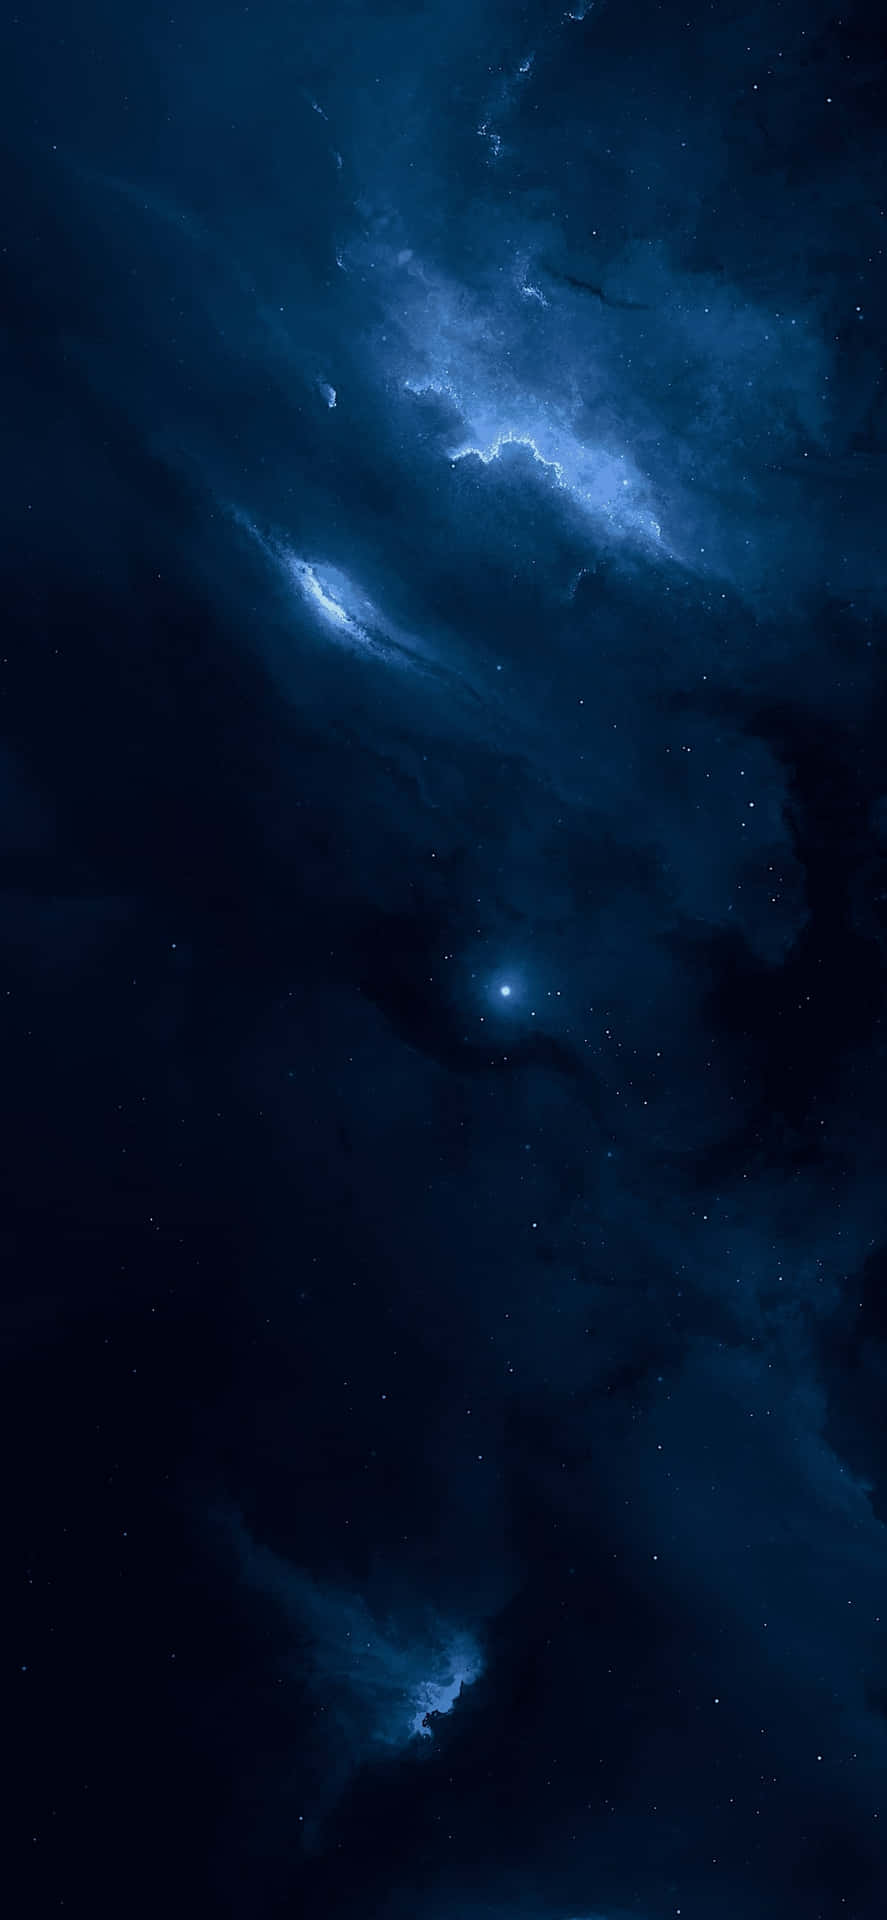 A Blue Sky With Clouds And Stars Wallpaper